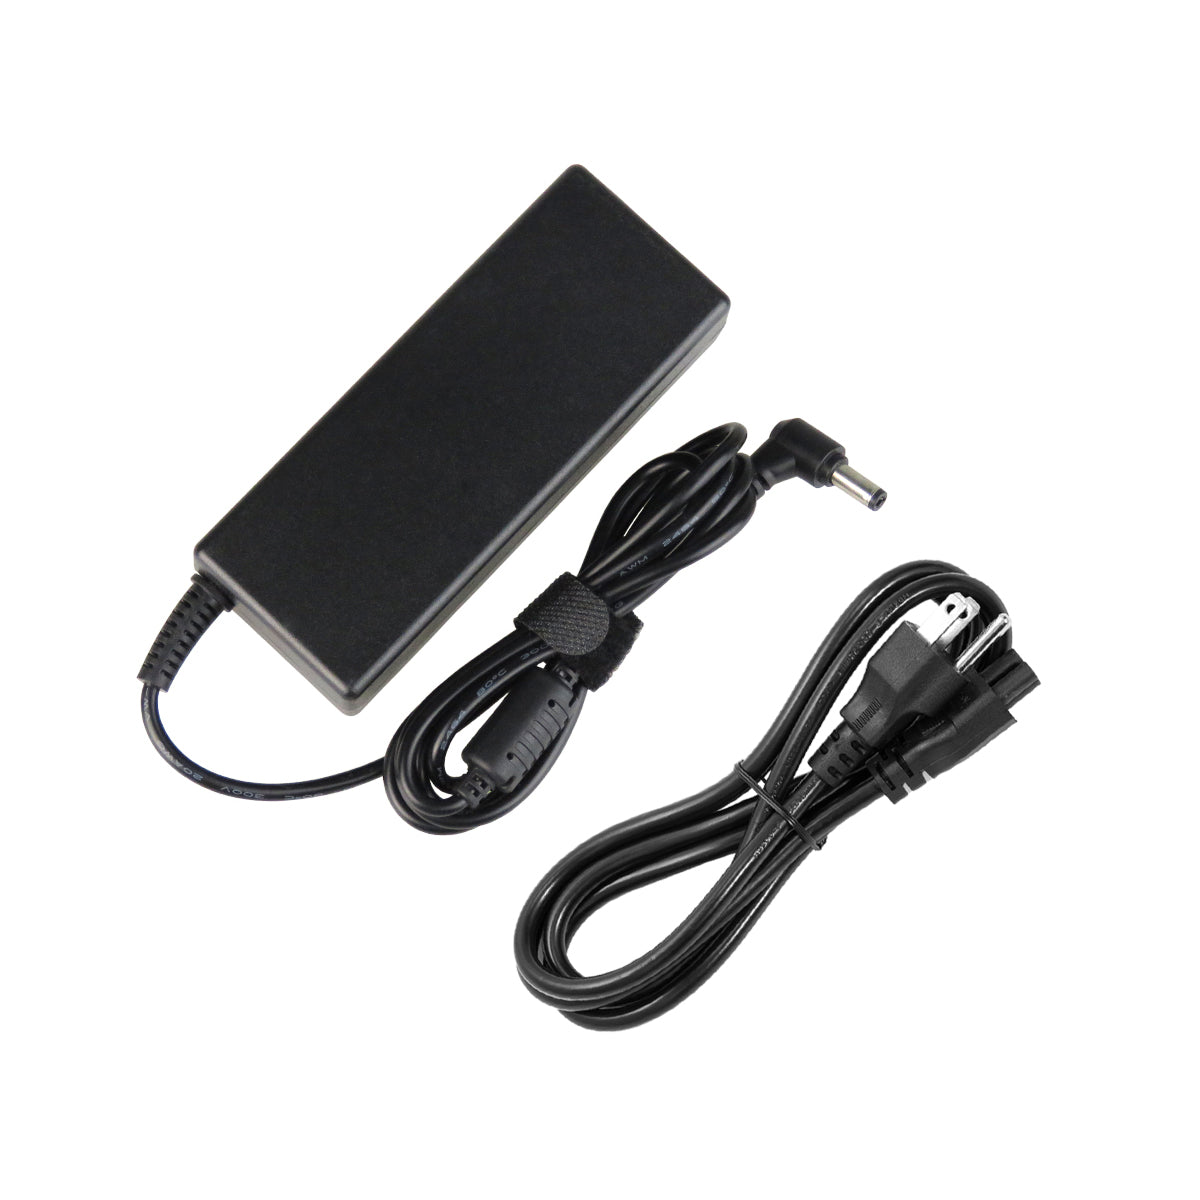 AC Adapter Charger for ASUS X58 Series Notebook.